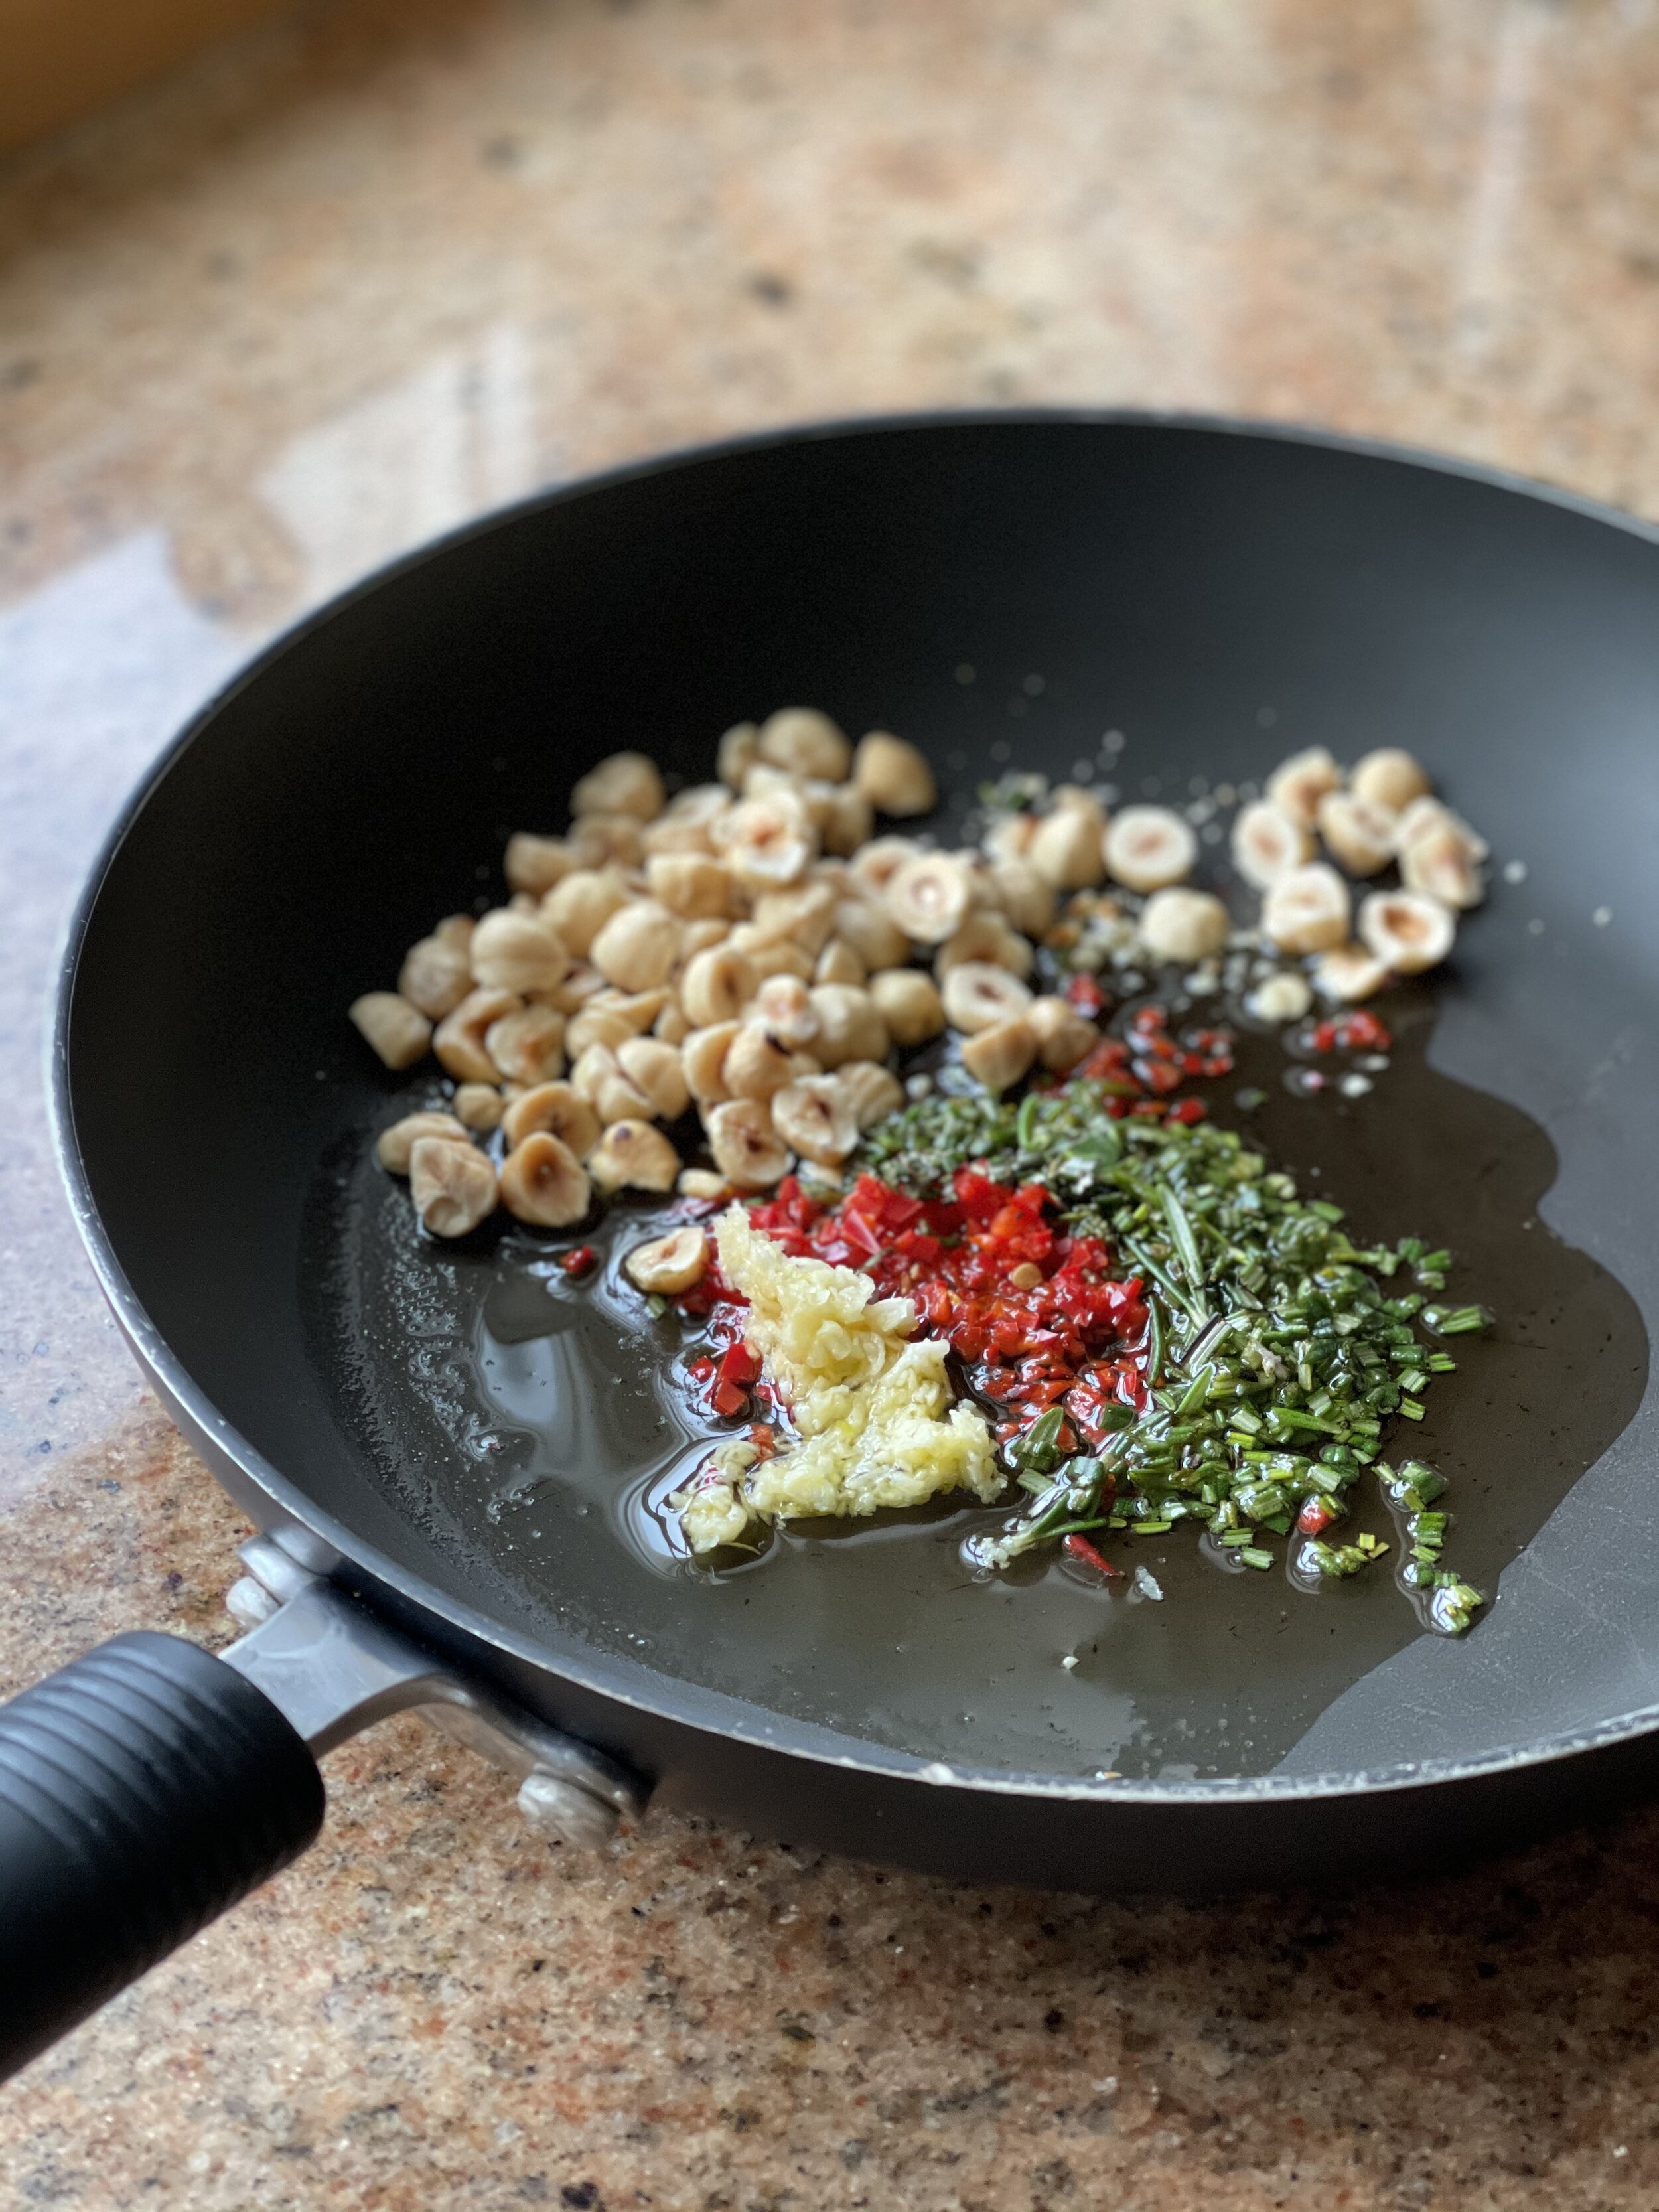 Garlic, chilli, hazelnuts and rosemary in the frying pan